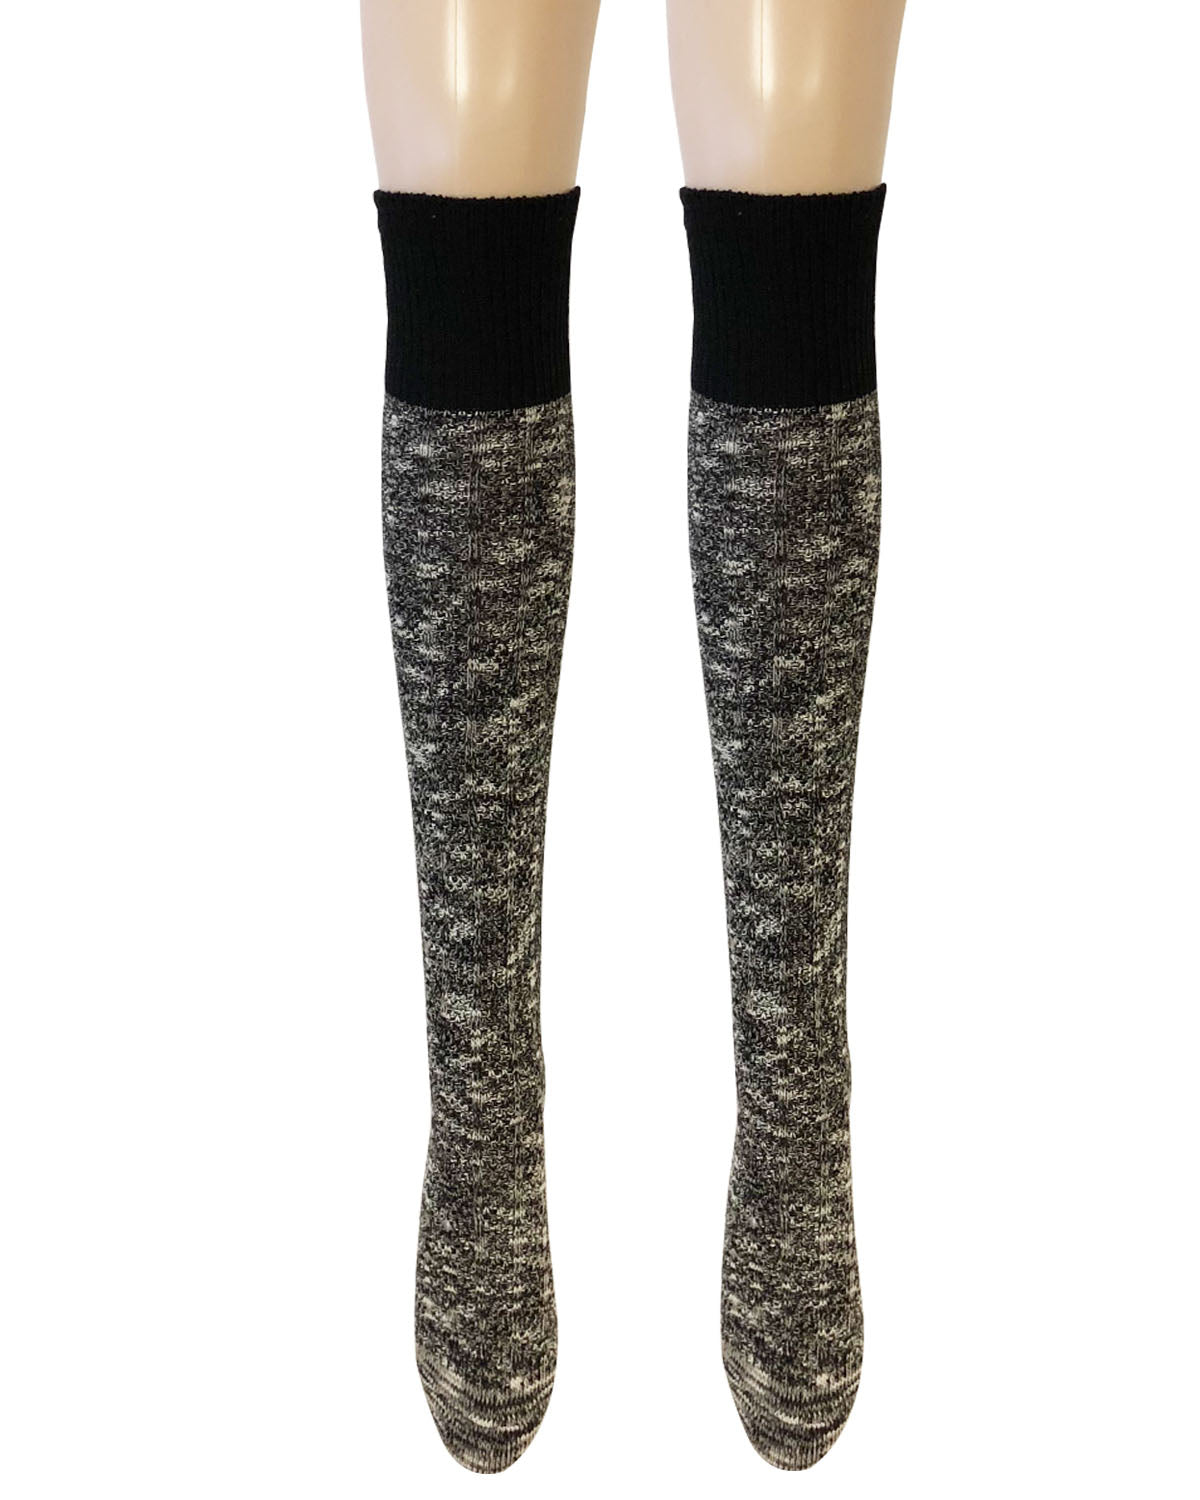 Wrapables Women's Warm Knitted Vintage Knee High Boot Socks